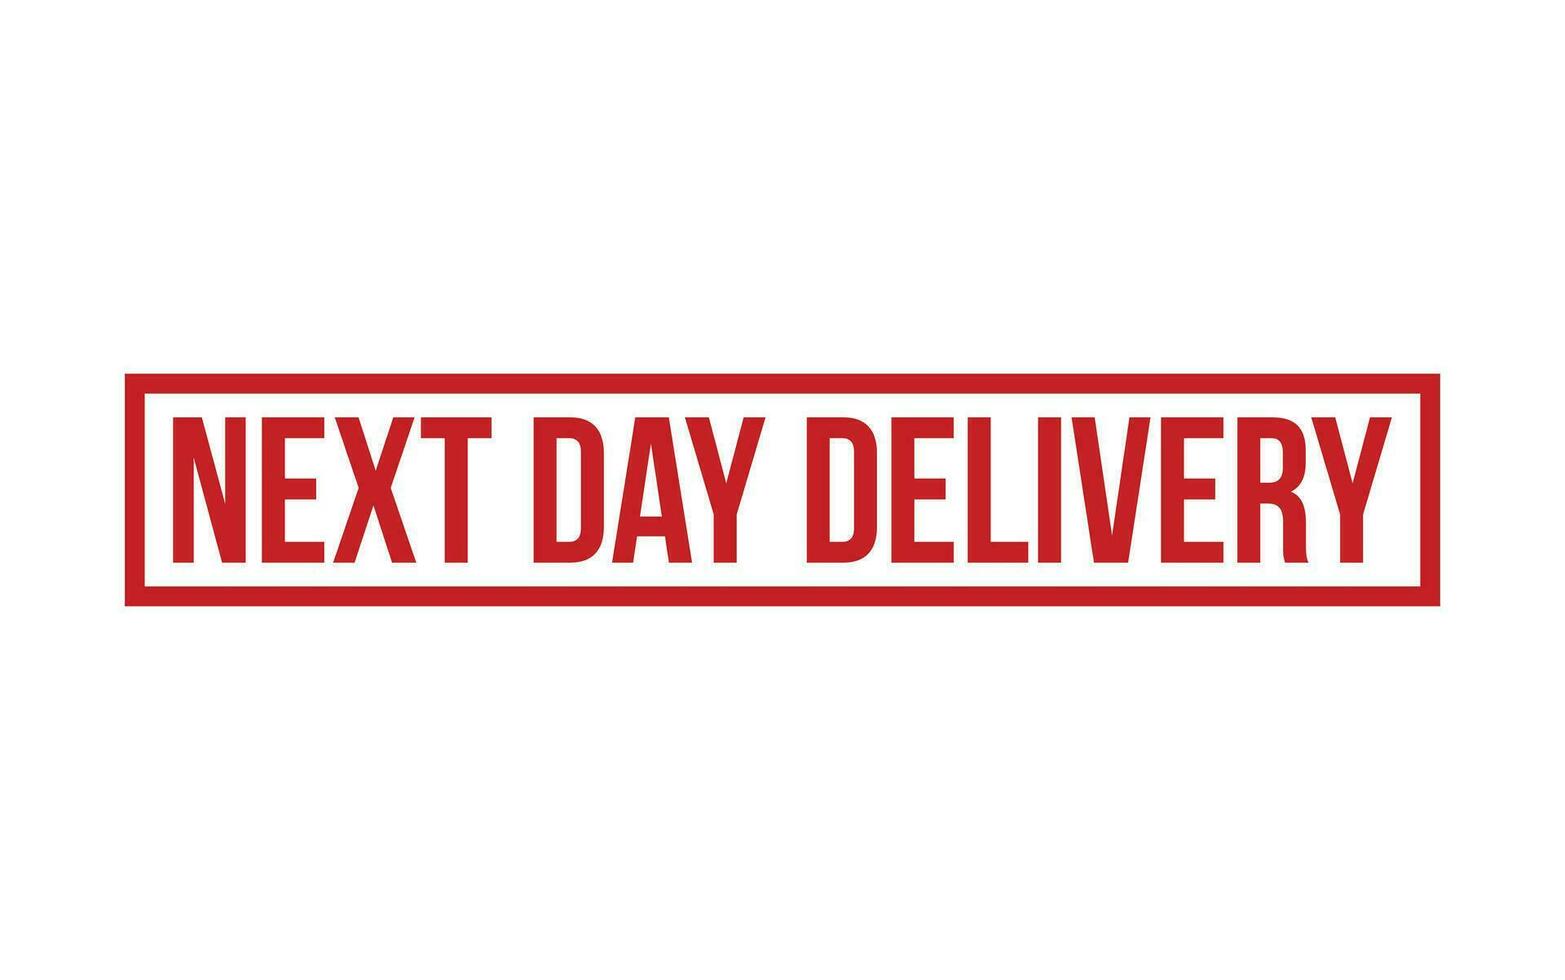 Red Next Day Delivery Rubber Stamp Seal Vector